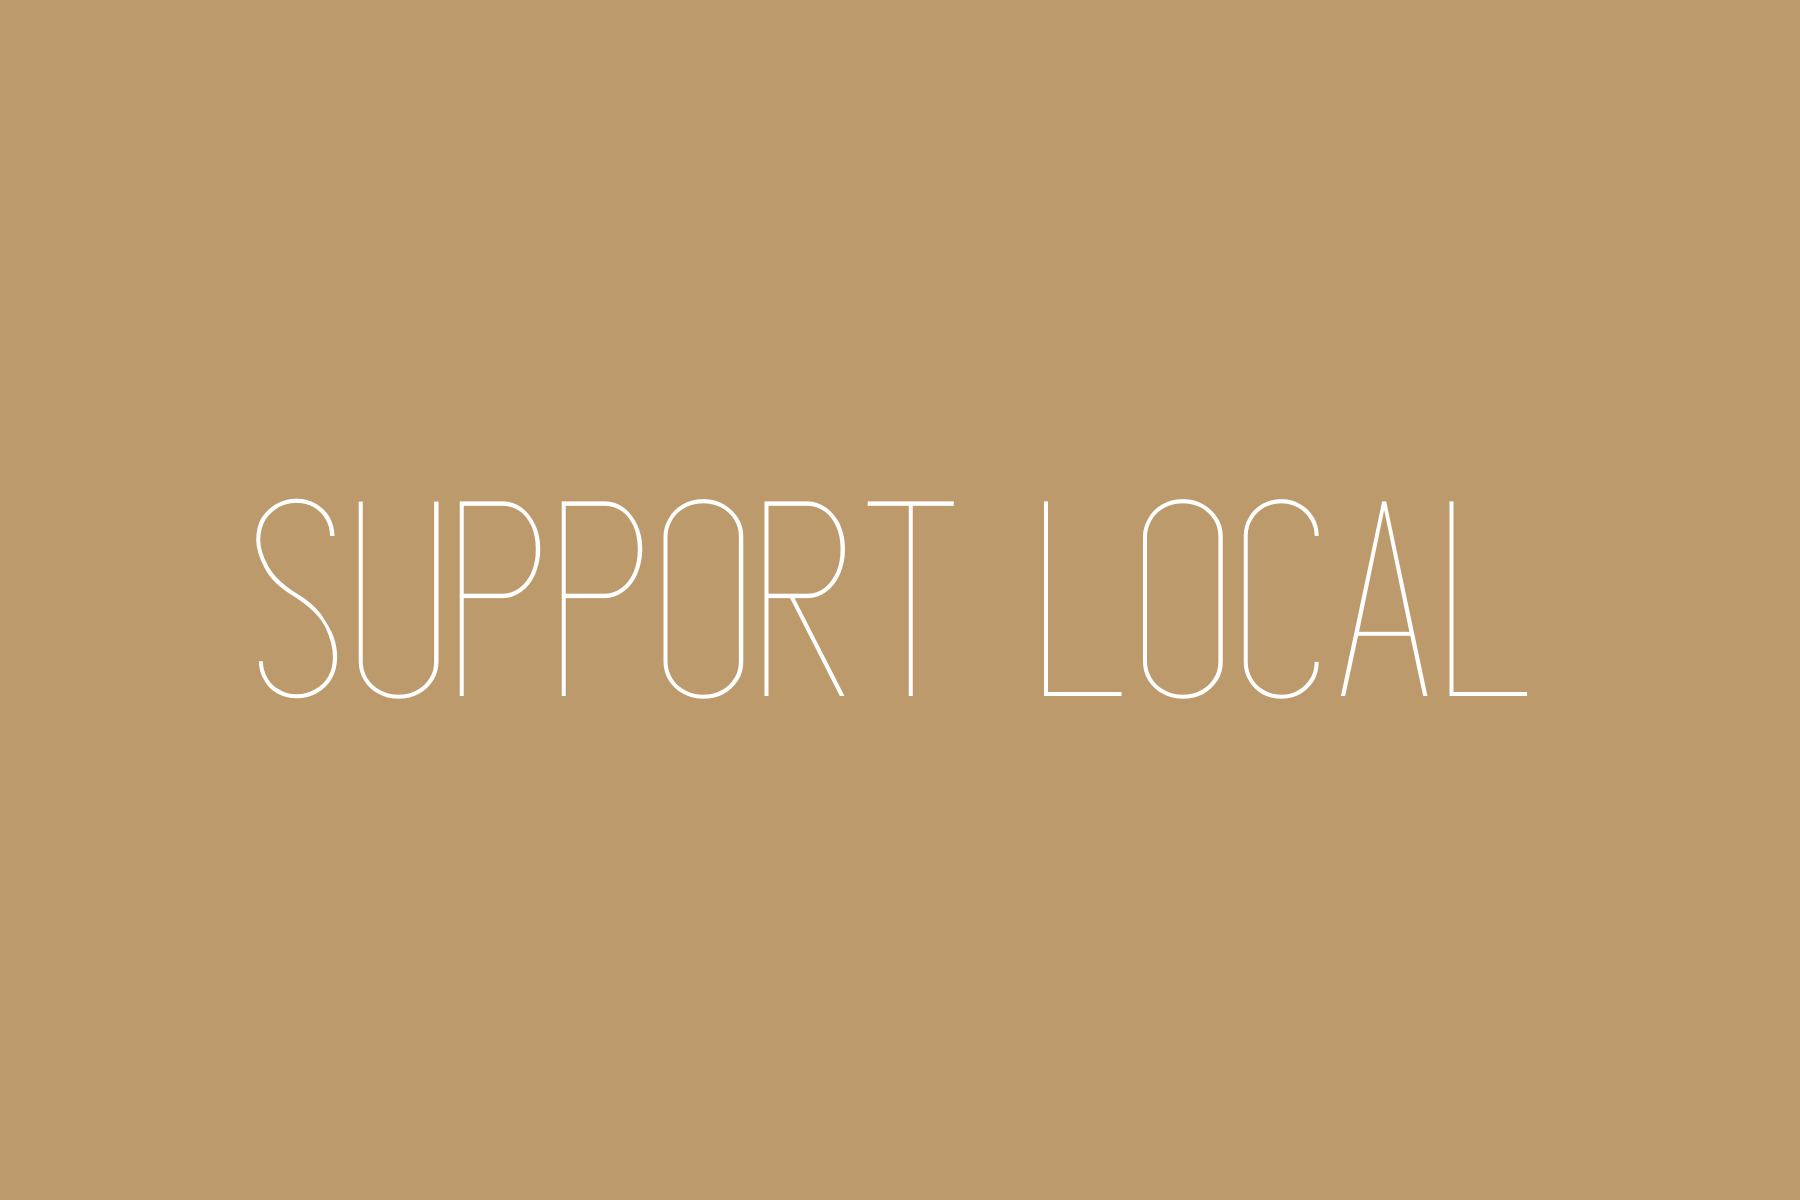 support small business, Saint Paul businesses, Saint Paul small business, support local, Block Studios, Saint Paul restaurants, West Saint Paul restaurants